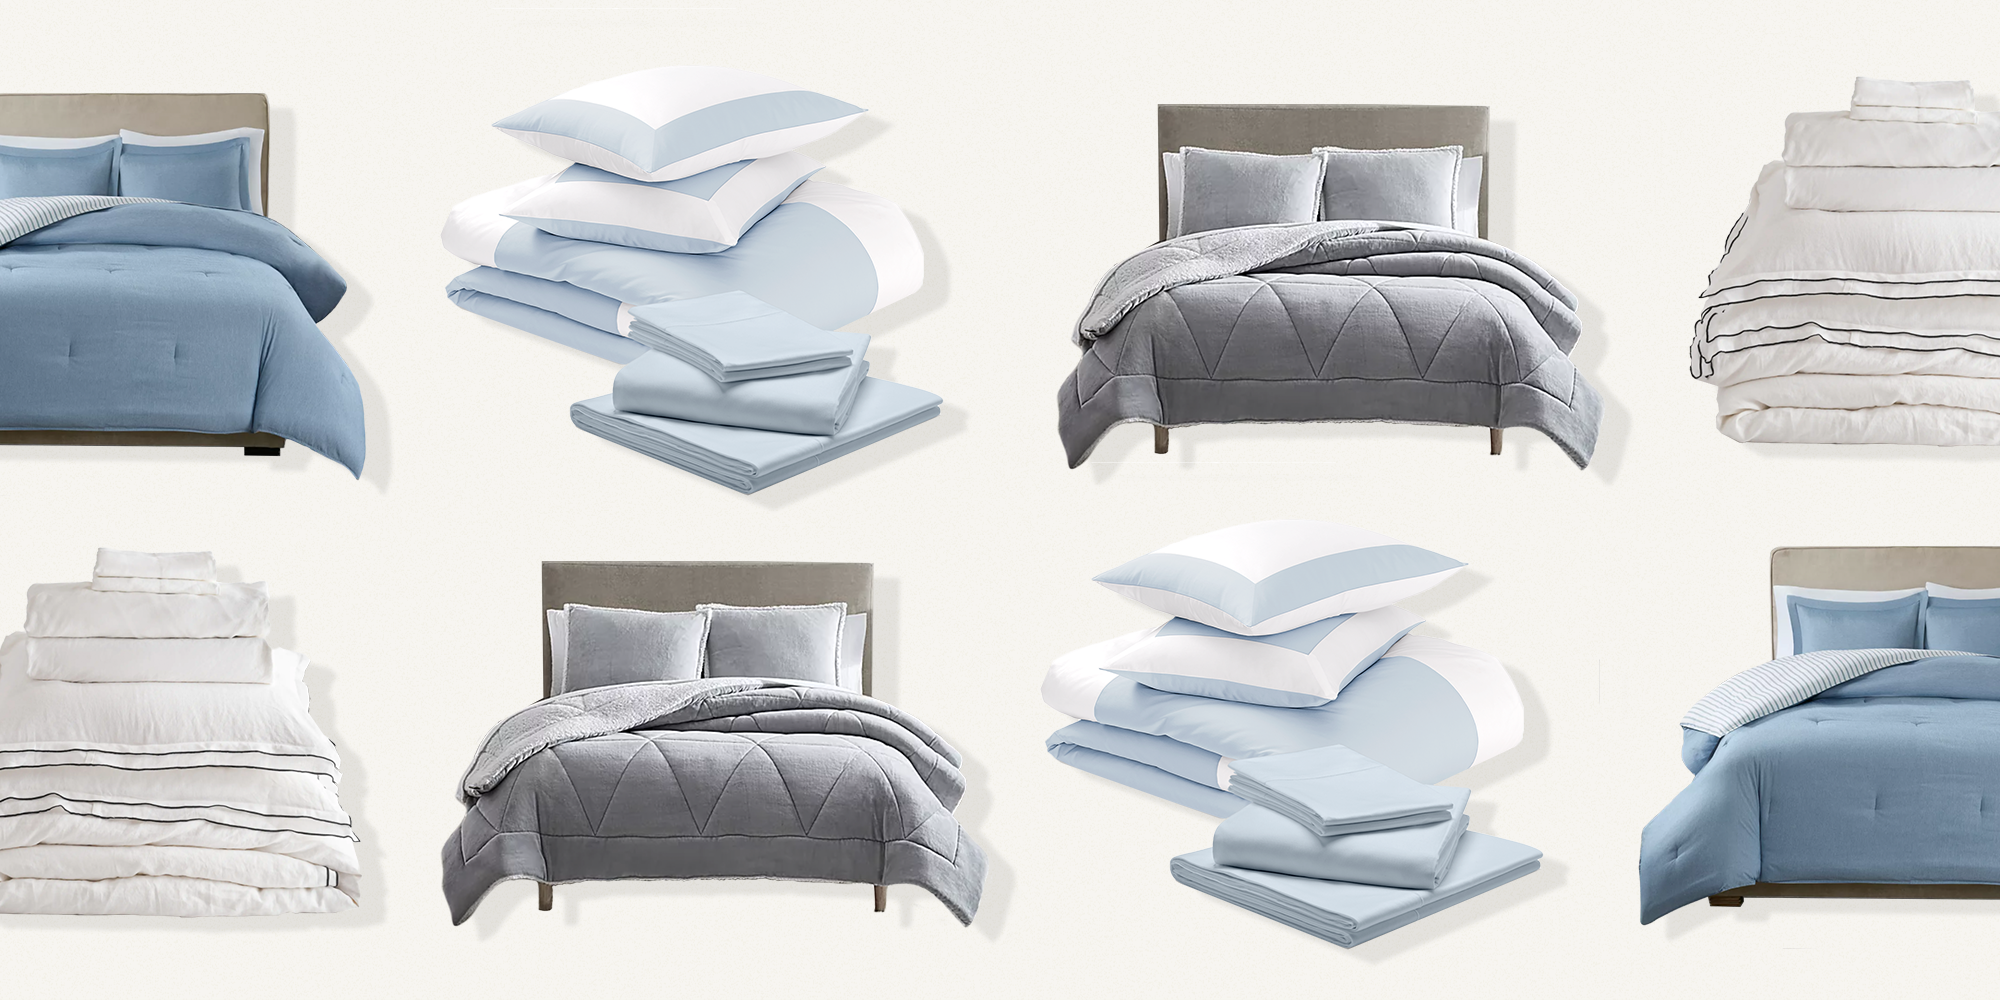 16 best comforter sets of 2021 the whole family will love